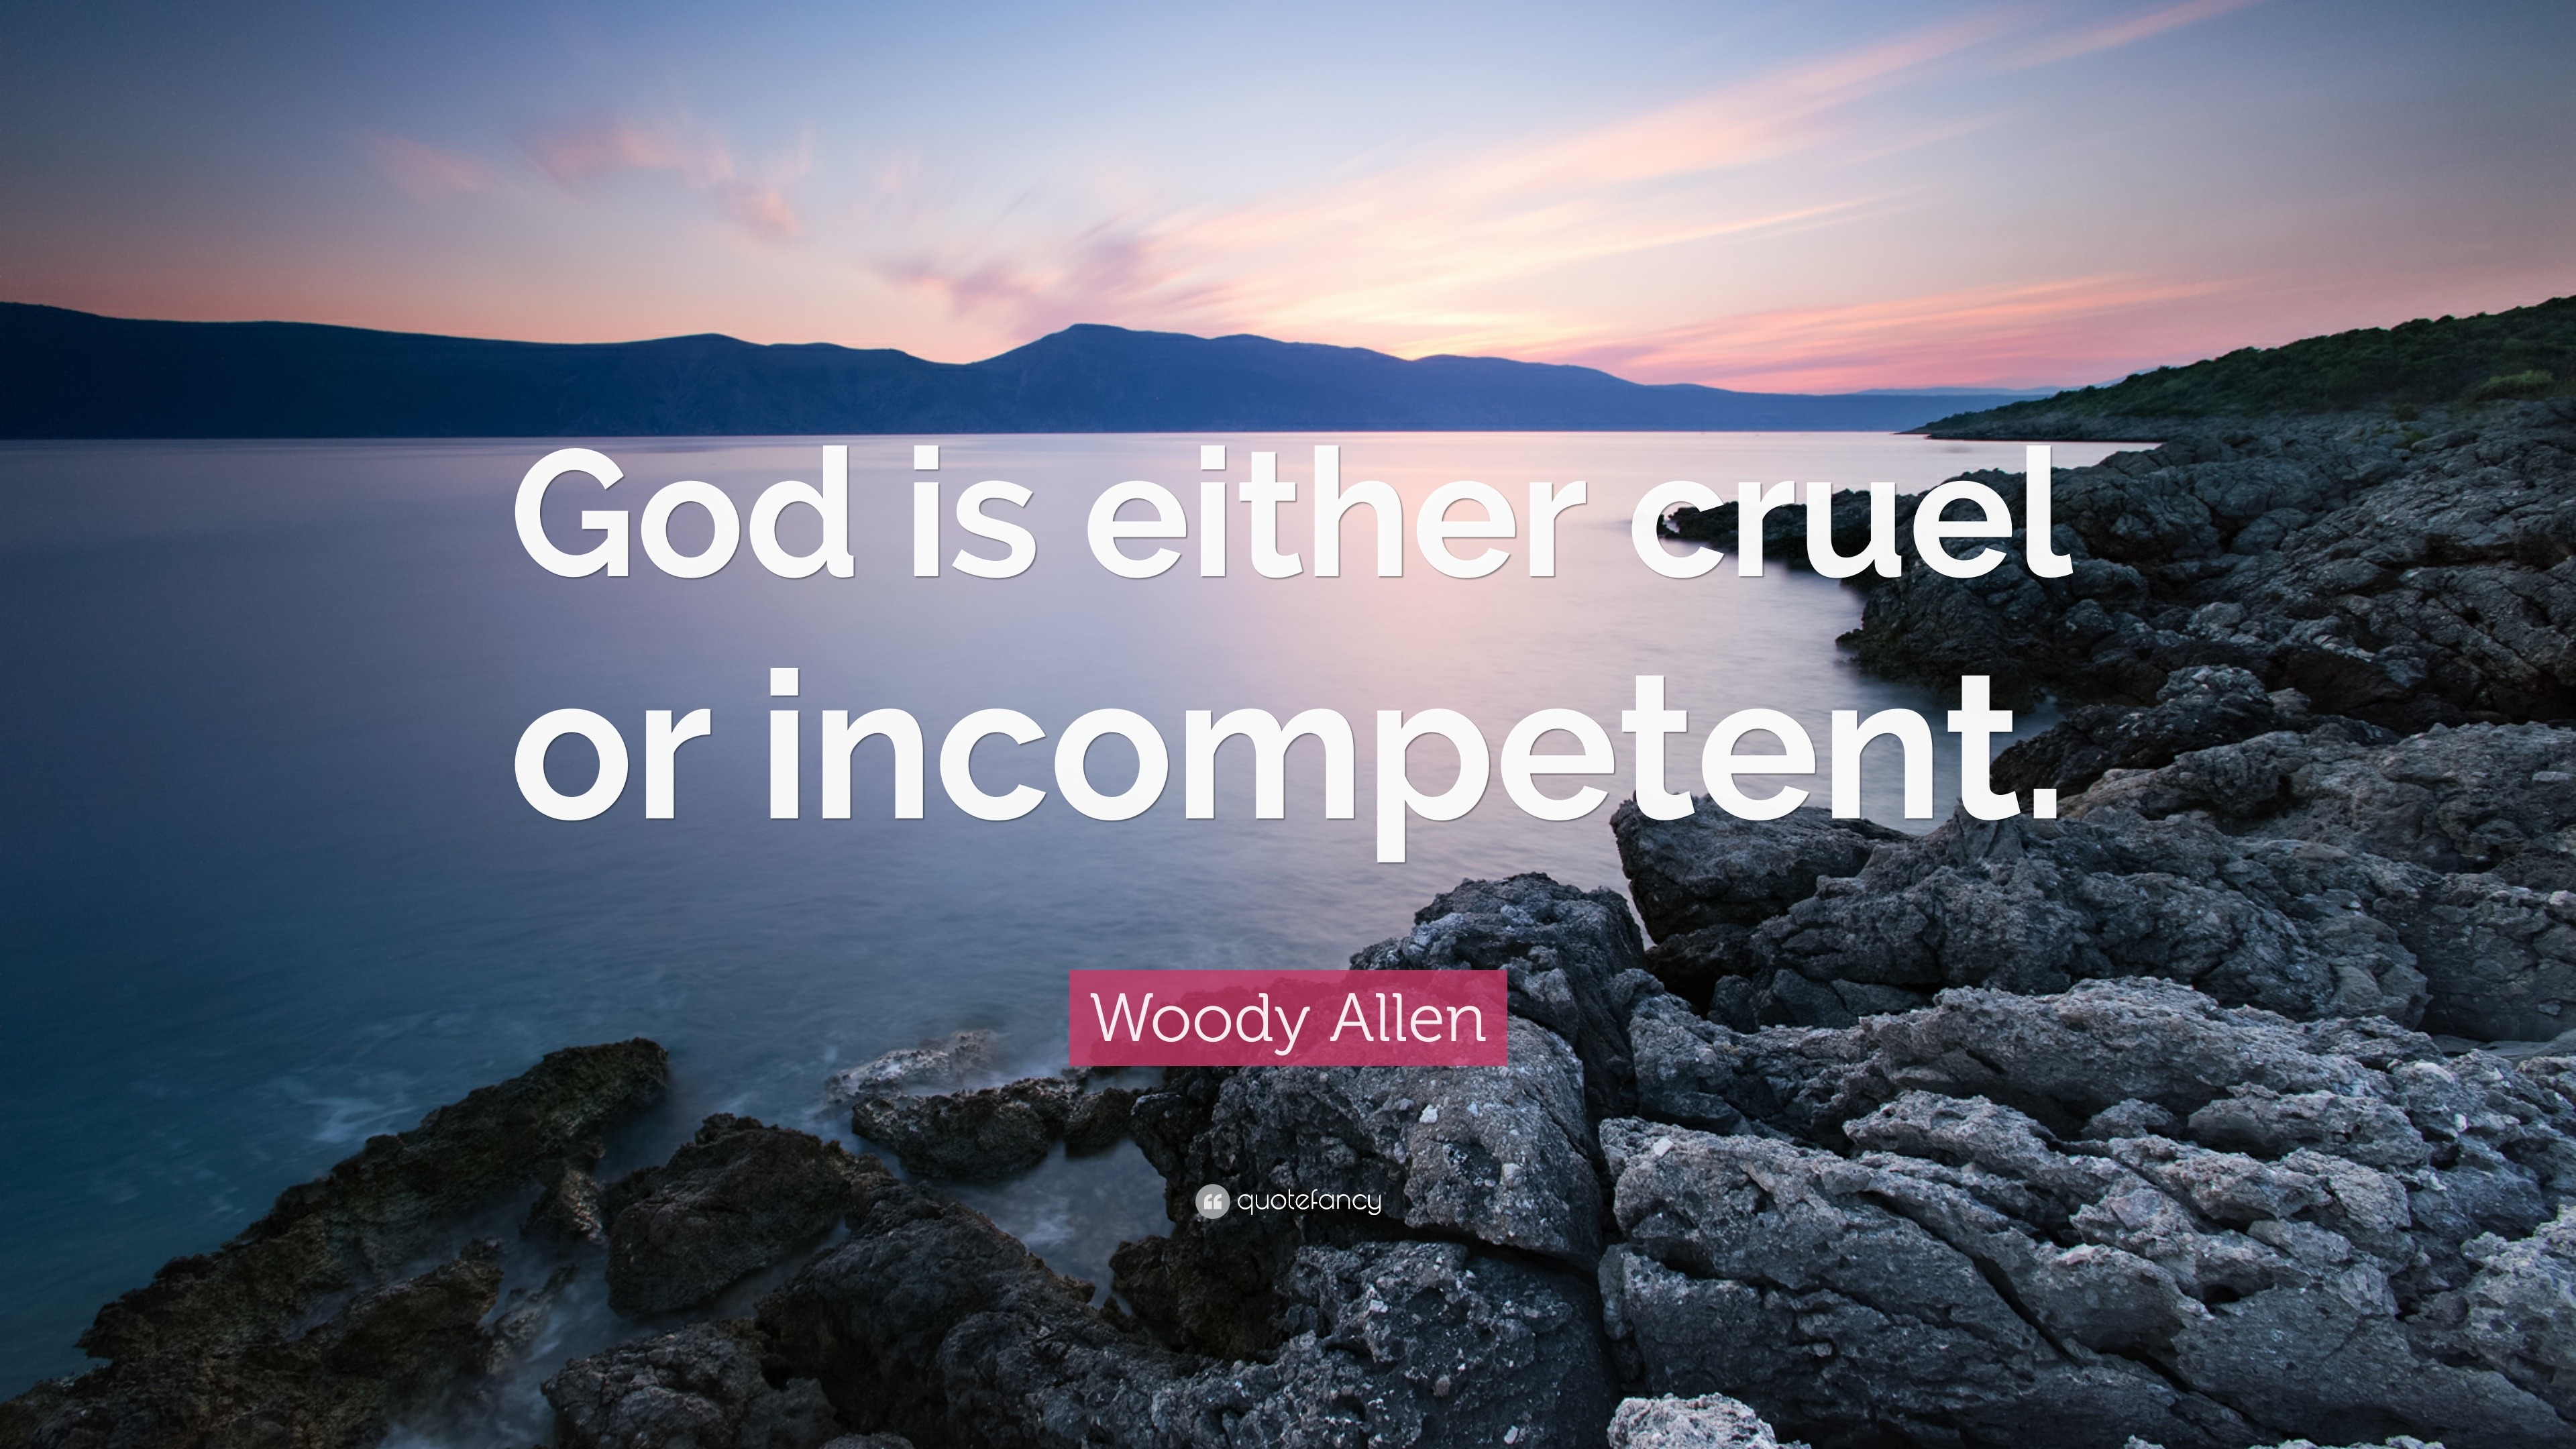 woody allen quote: "god is either cruel or incompetent.